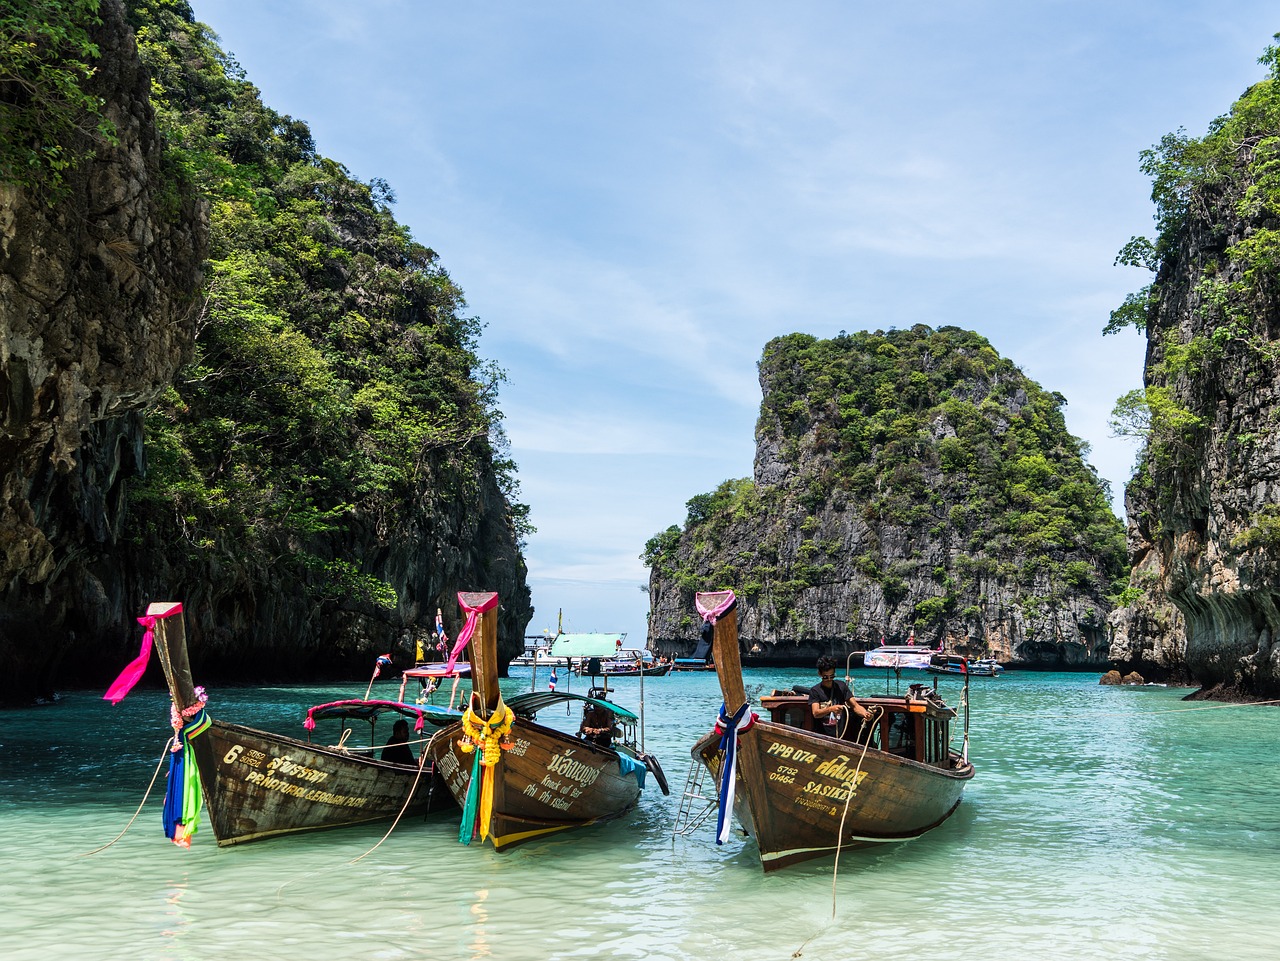 Phuket: From Water Sports to Island Hopping